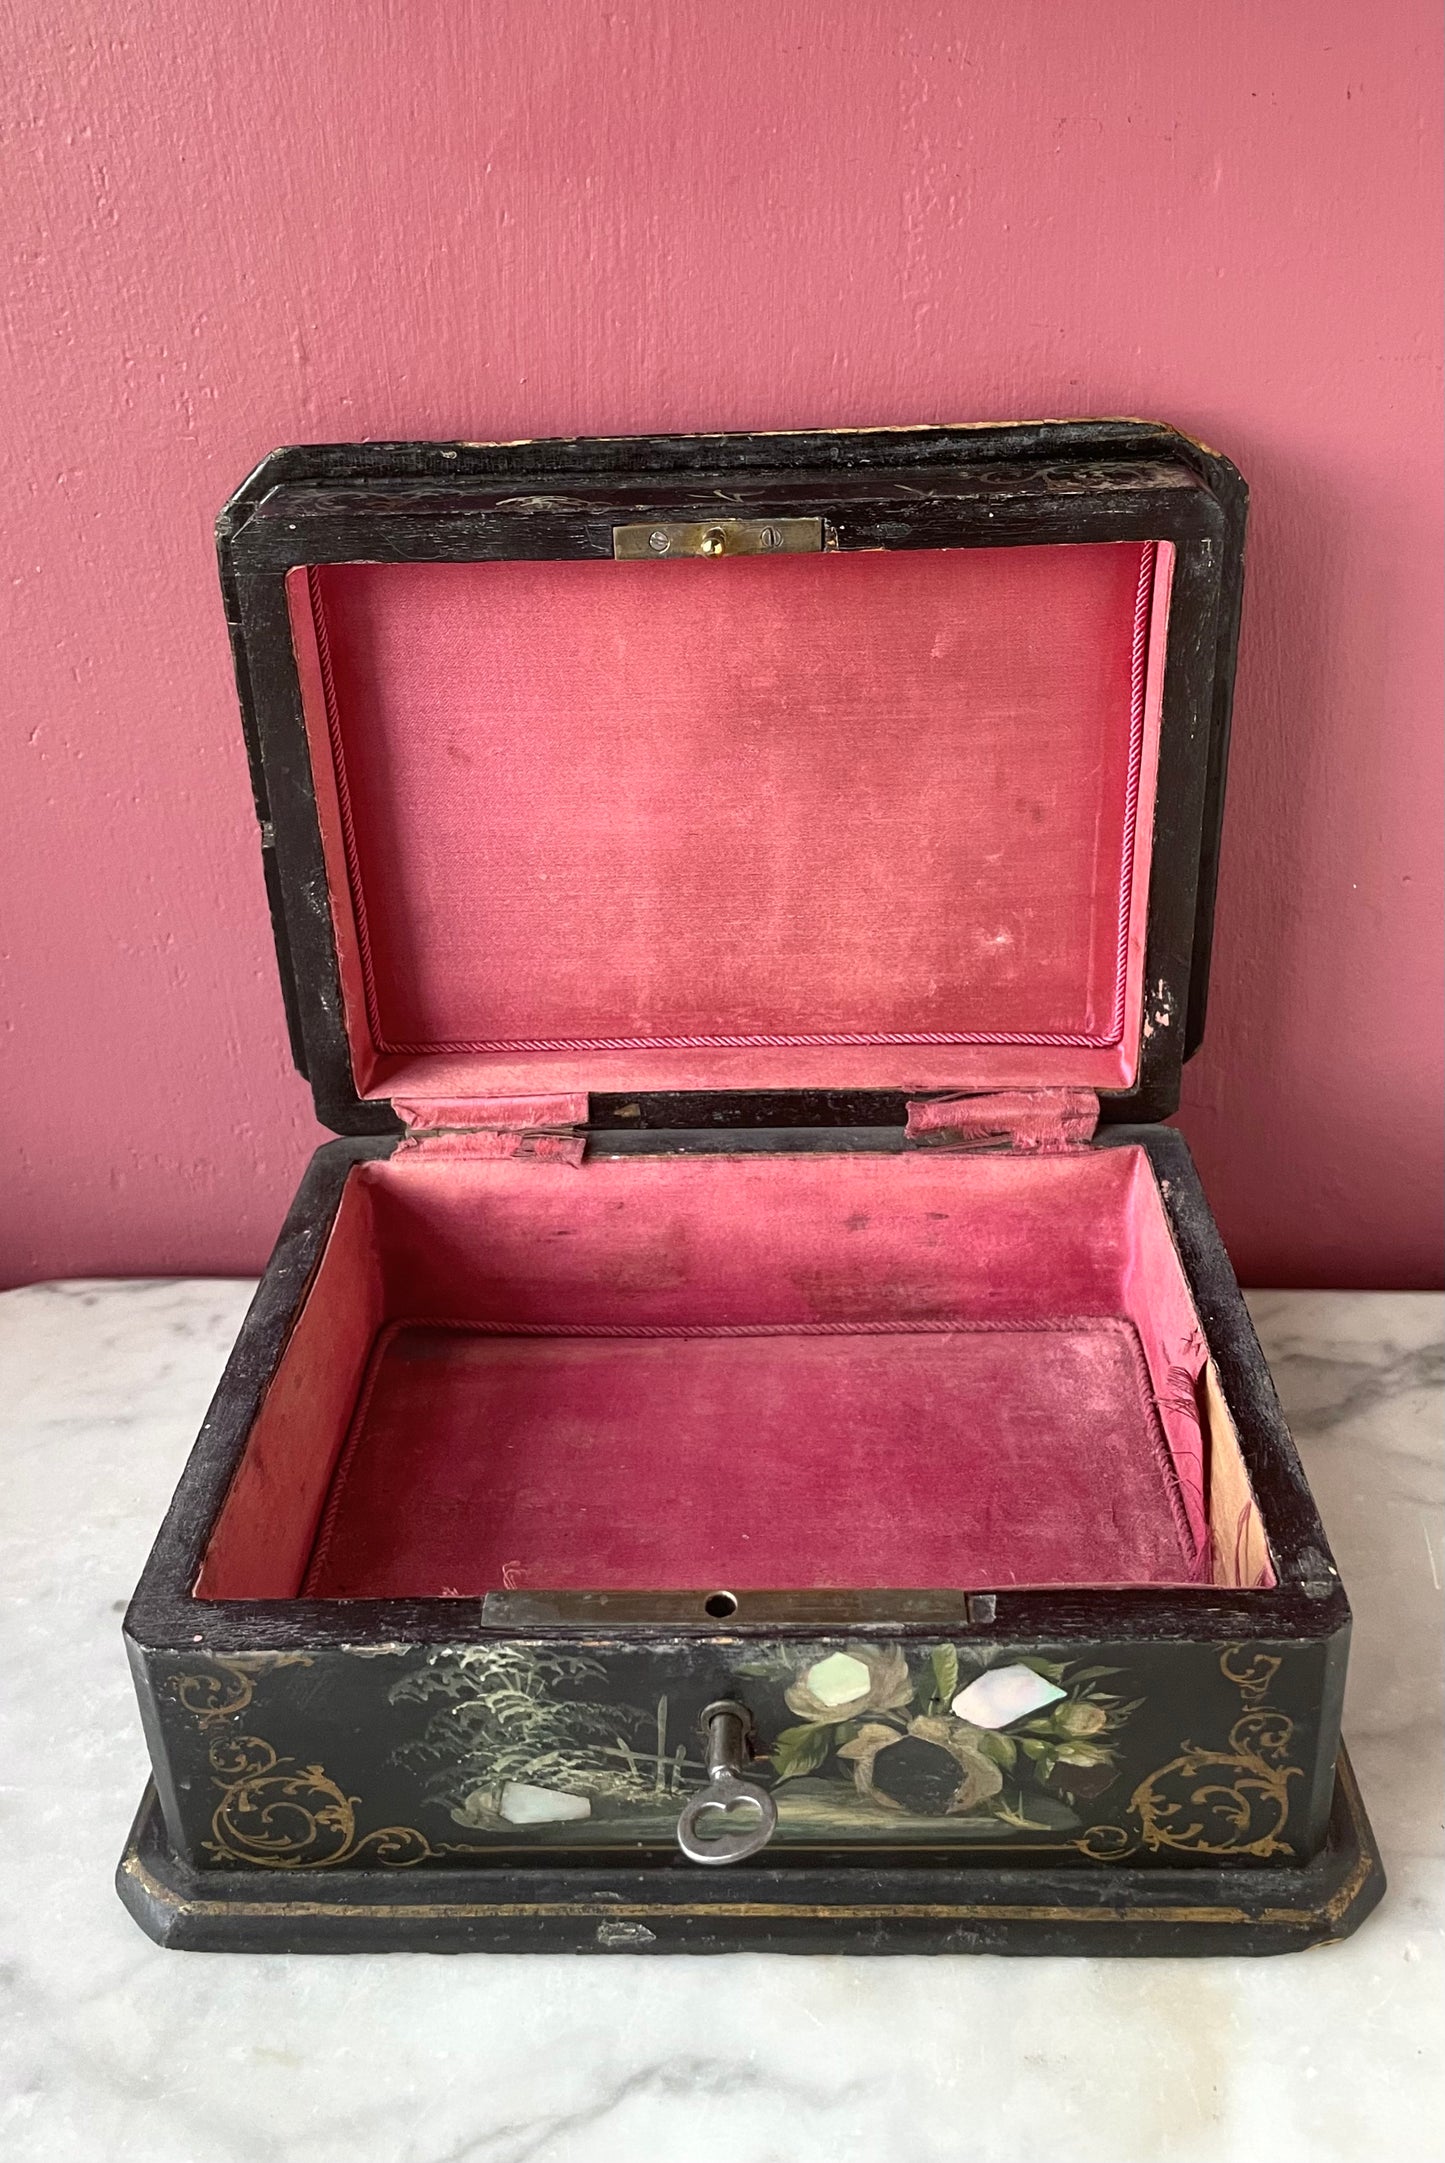 Victorian Black Lacquer Box with Mother of Pearl